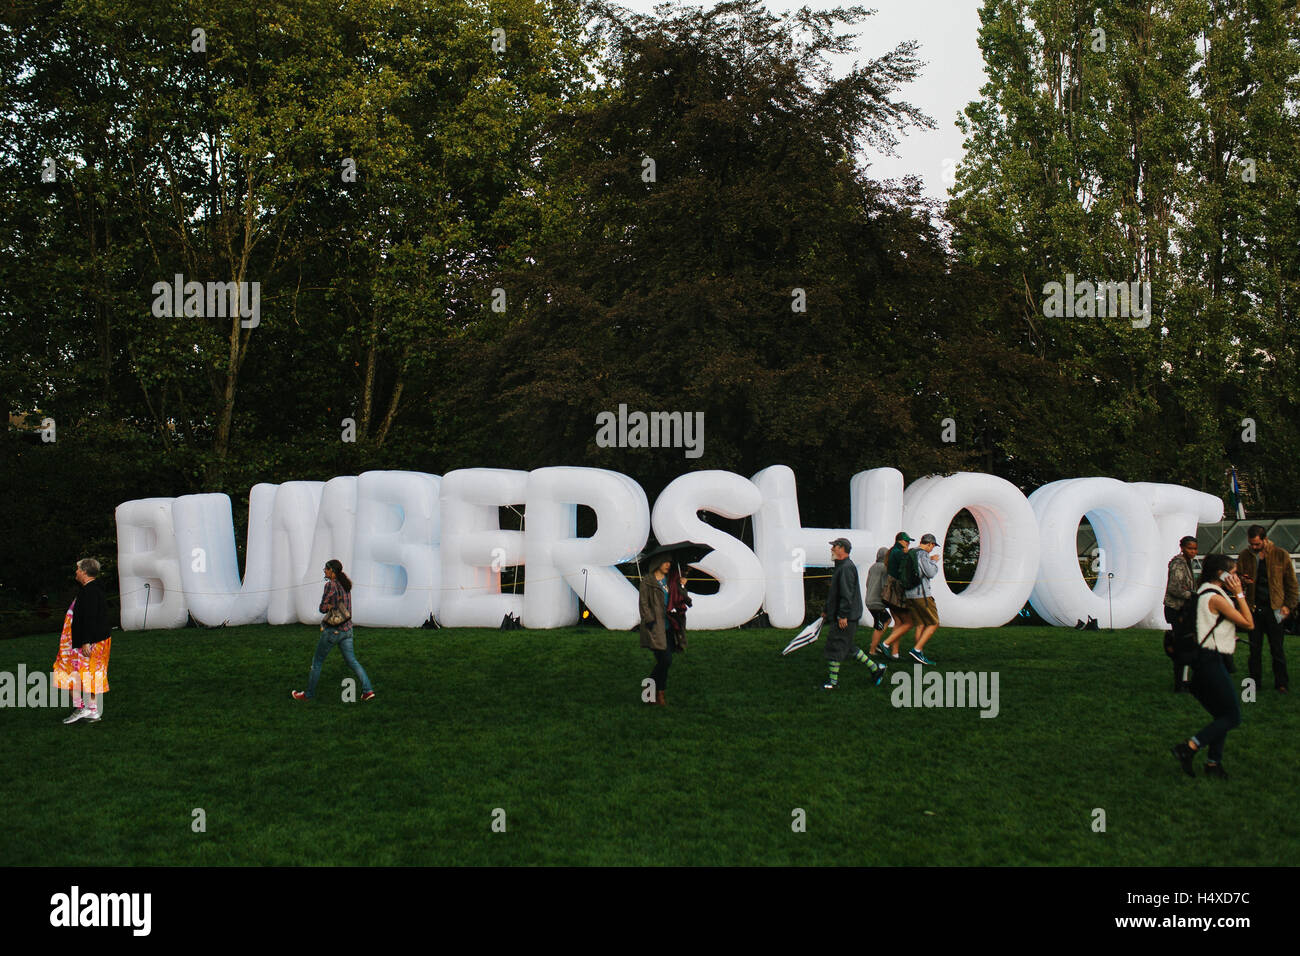 Blow up letter atmosphere during day at Bumbershoot Festival on September 5, 2015 in Seattle, Washington. Stock Photo